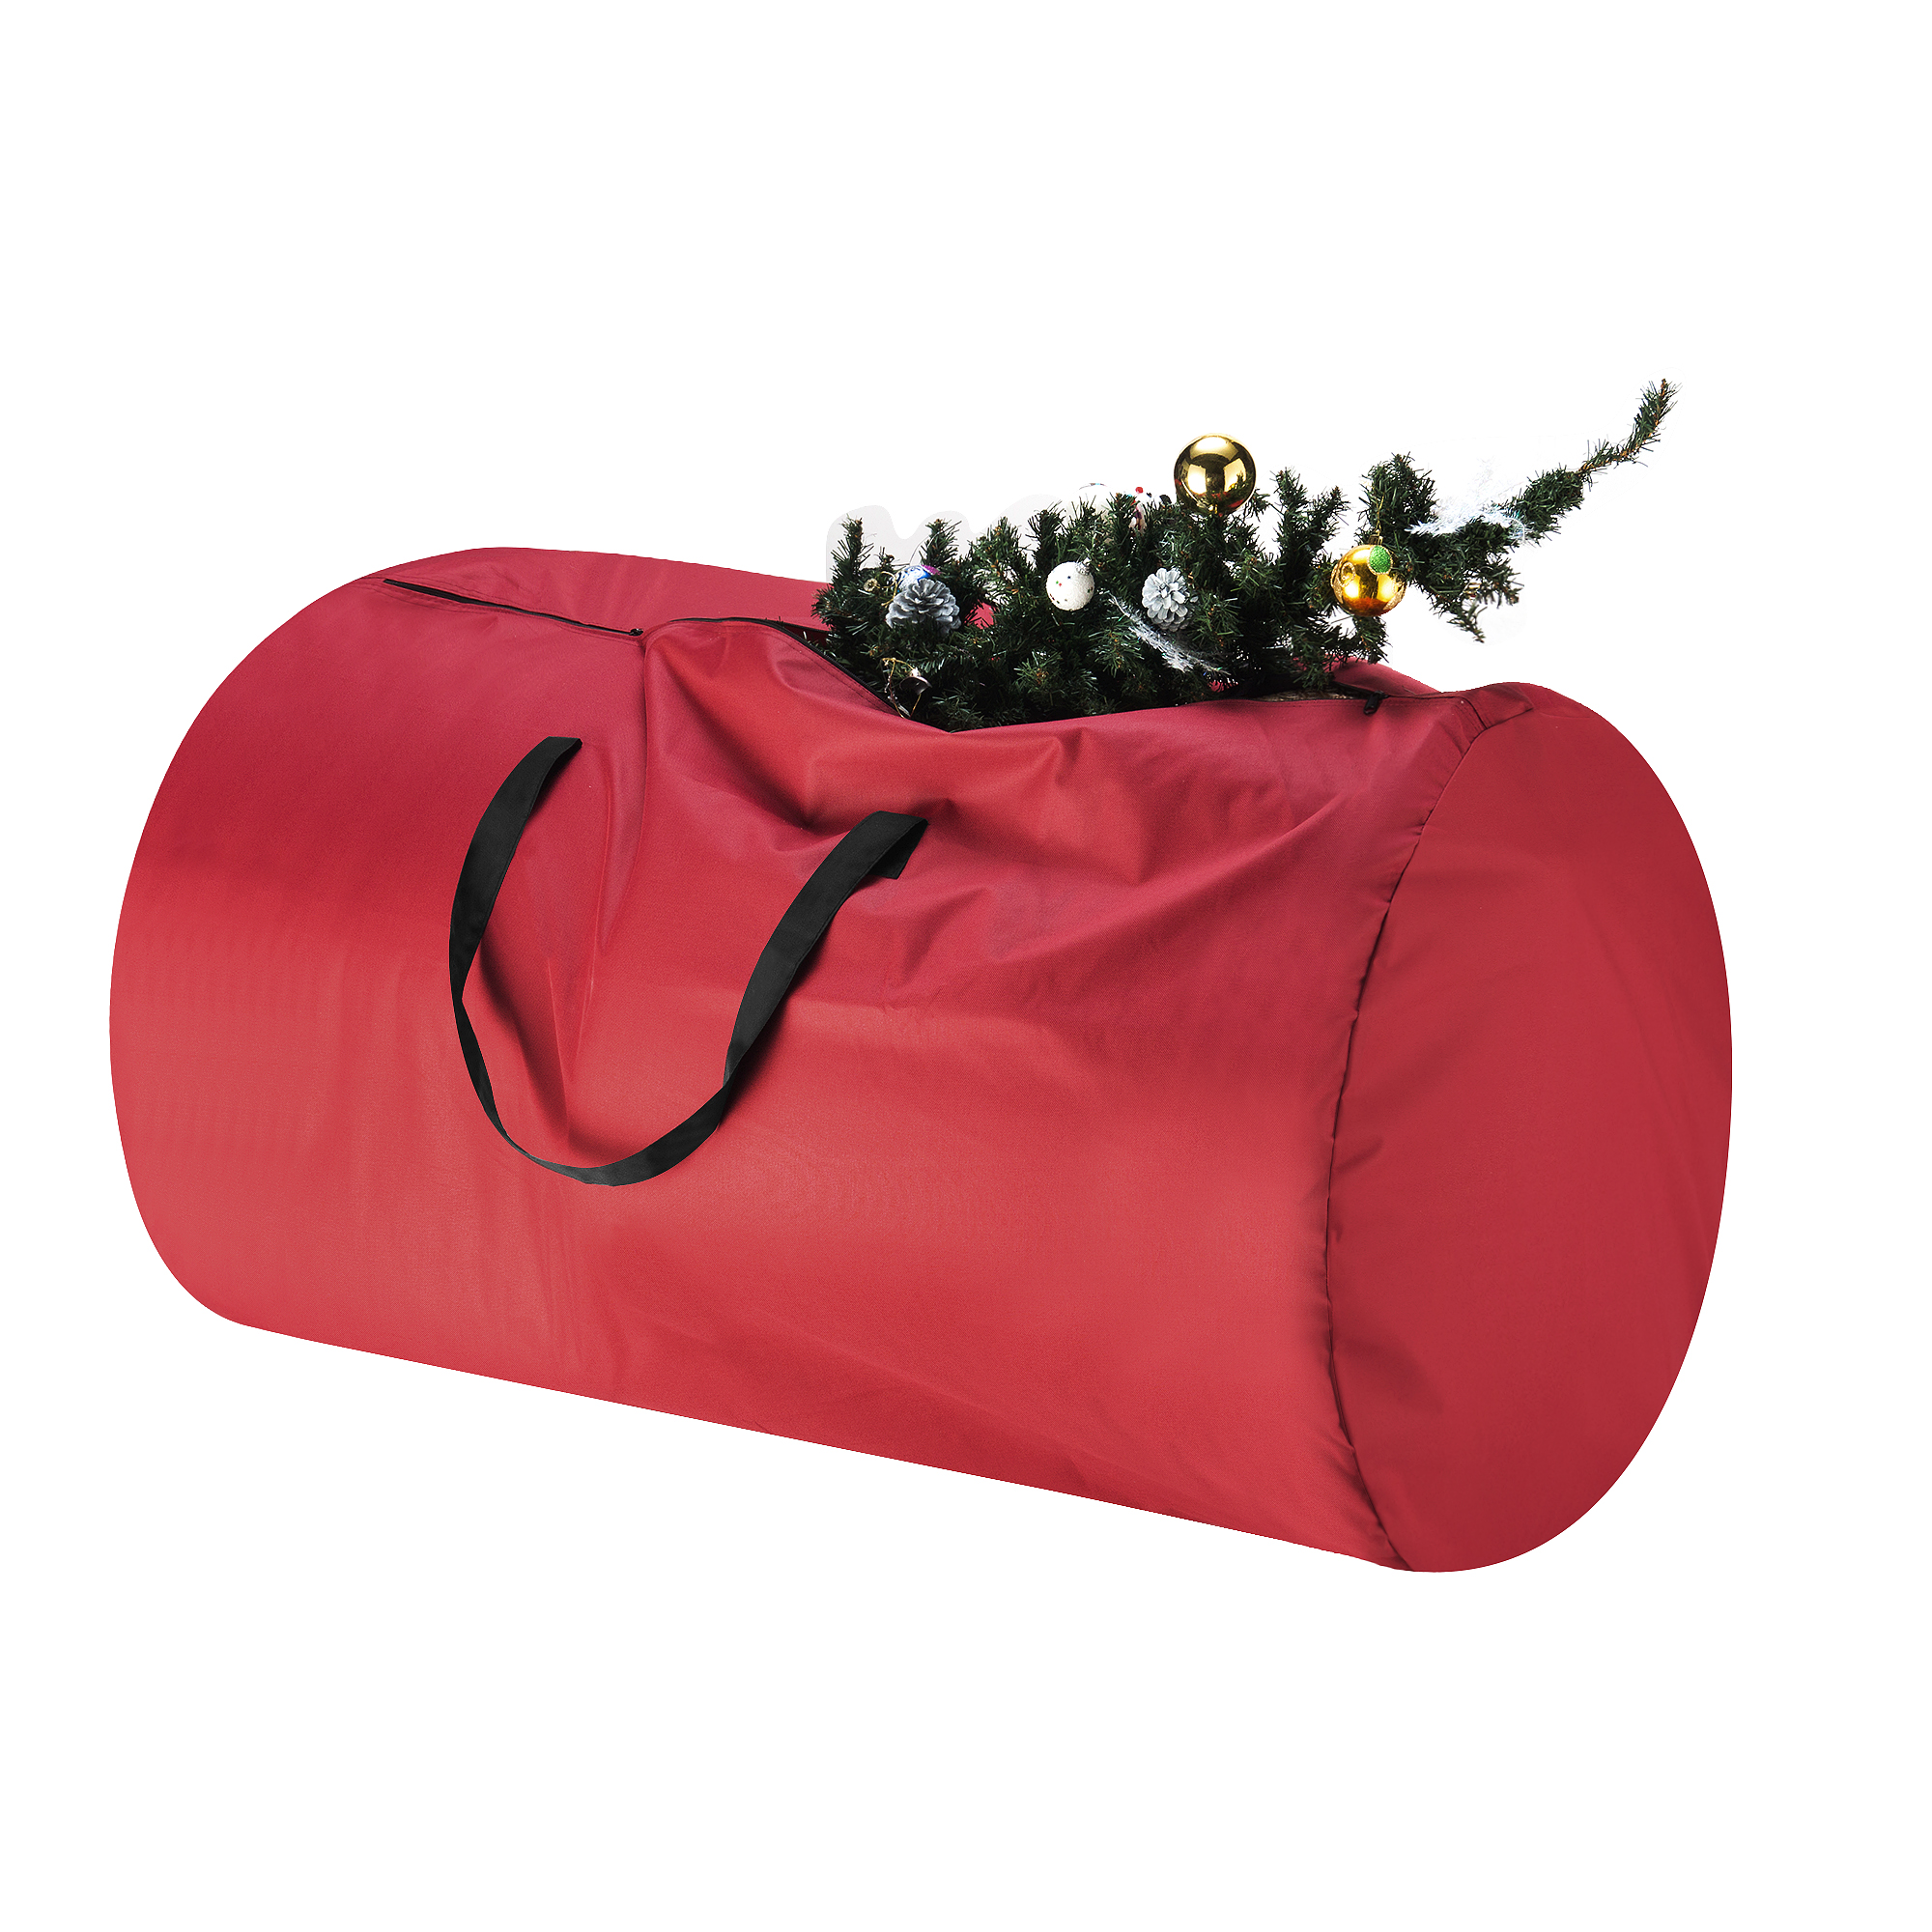 Tiny Tim Totes Red Canvas Christmas Tree Storage Bag, Large For 9 Foot Tree - image 1 of 2